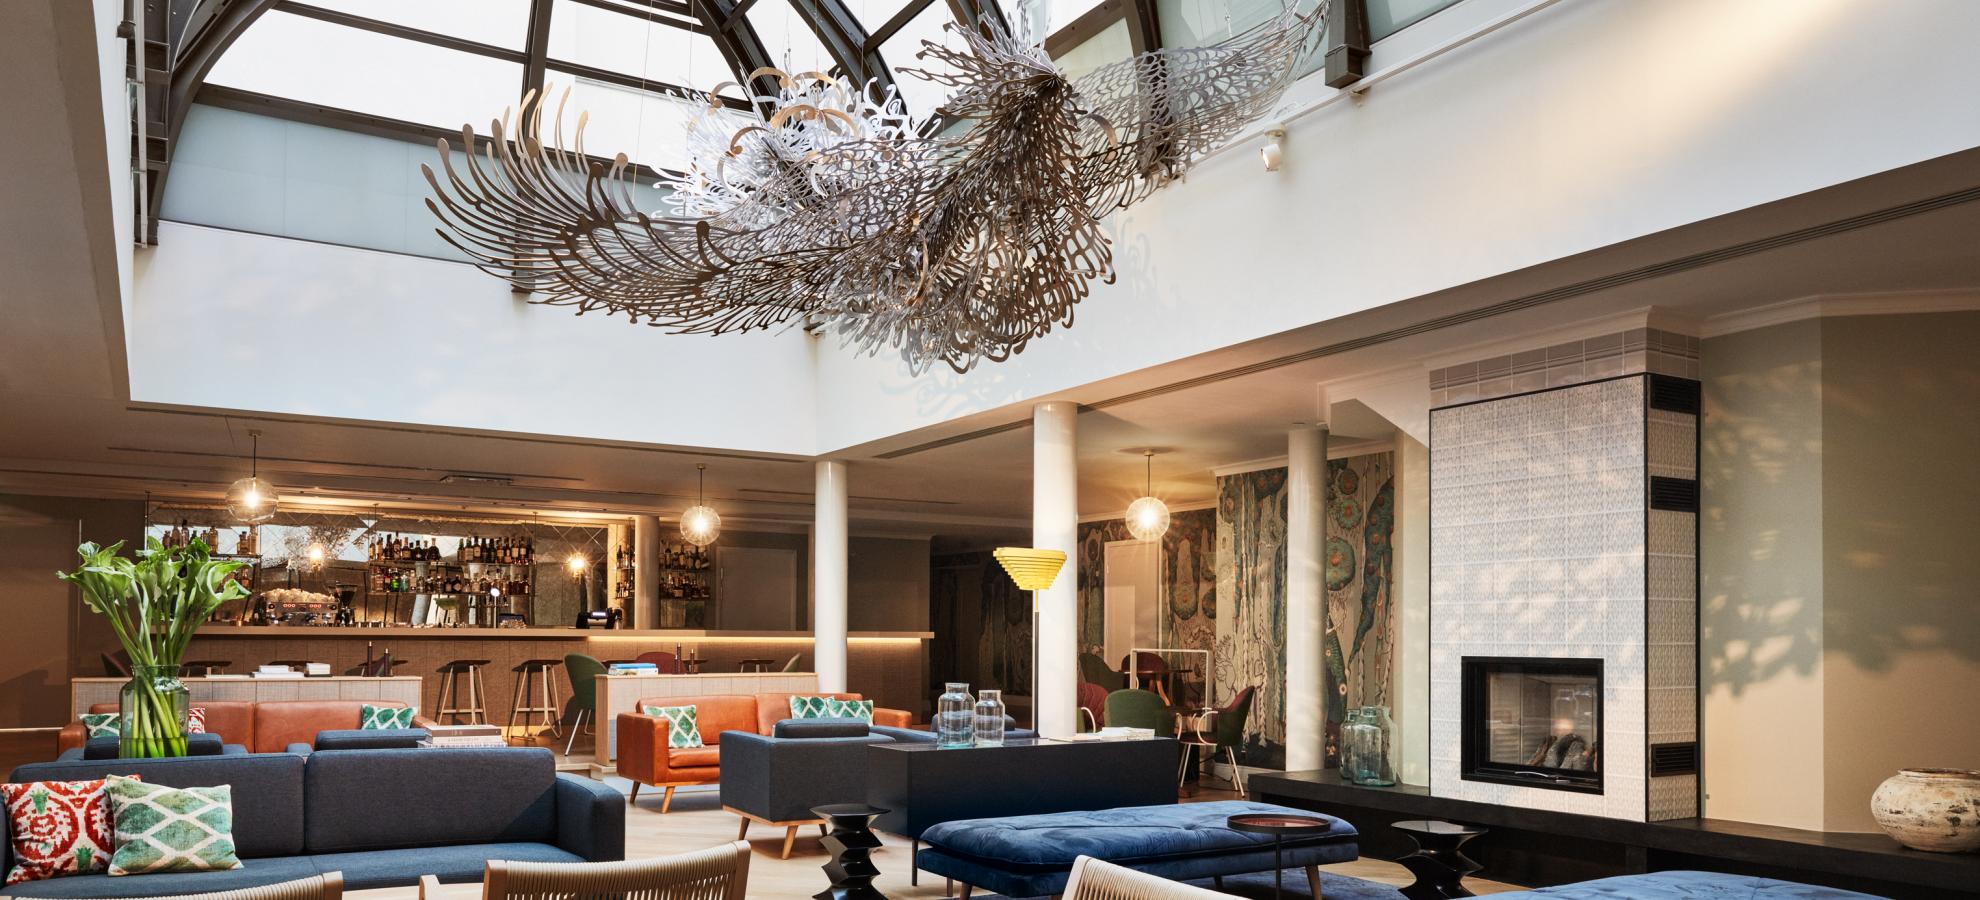 Hotel St.George Wintergarden, a large seated area filled with luxurious sofas and chairs underneath a skylight that stretches almost the whole length of the room. Pekka Jylhä's "Learning to Fly" sculpture hangs from the ceiling of the skylight..